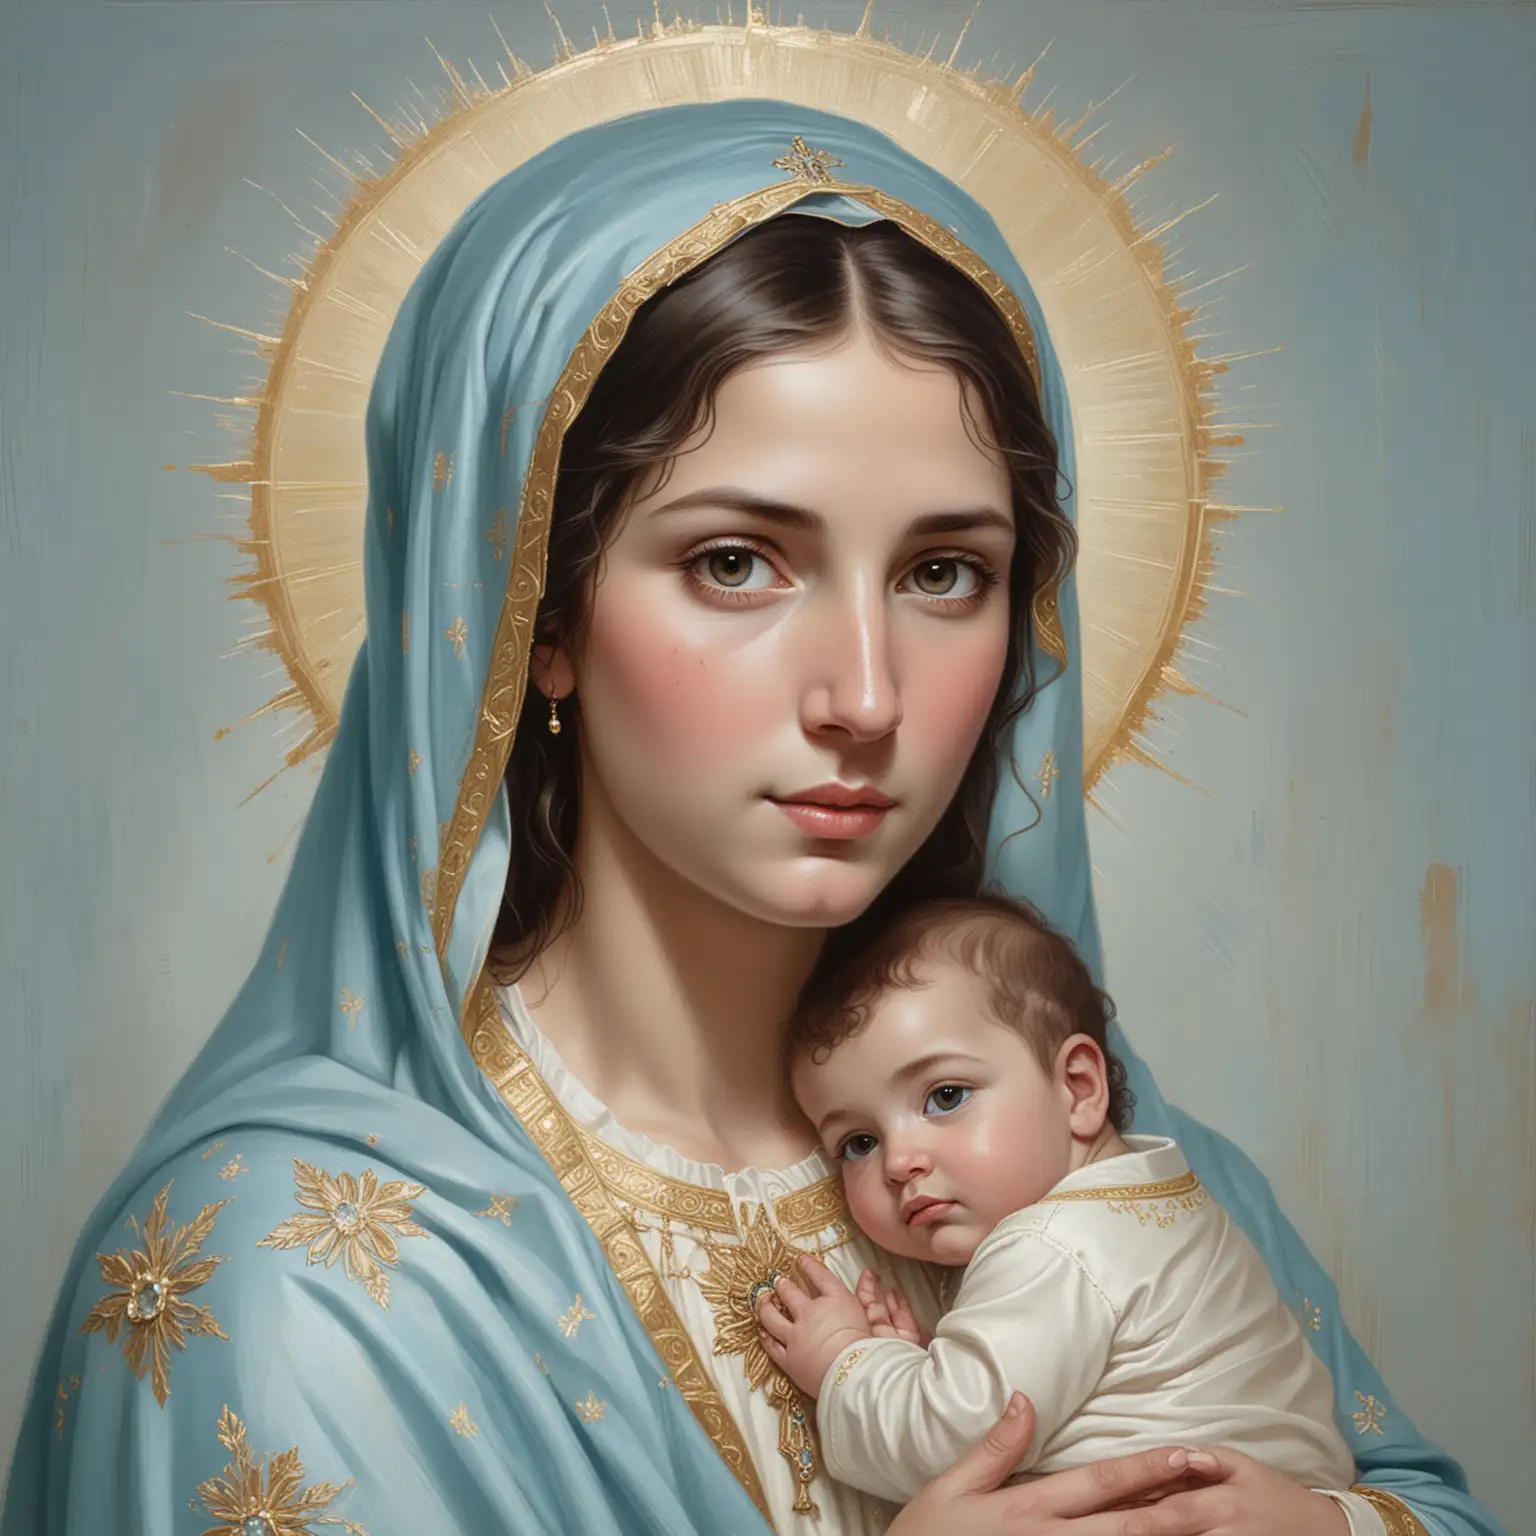 A PAINTING OF A YOUNG VIRGIN MARY, DRESSED IN LIGHT BLUE WITH GOLD EMBELLISHED ACCENTS, HOLDING A BABY JESUS, BOTH SUBJECTS WITH DARK HAIR AND BROWN EYES, LOOKING STRAIGHT AT THE VIEWER